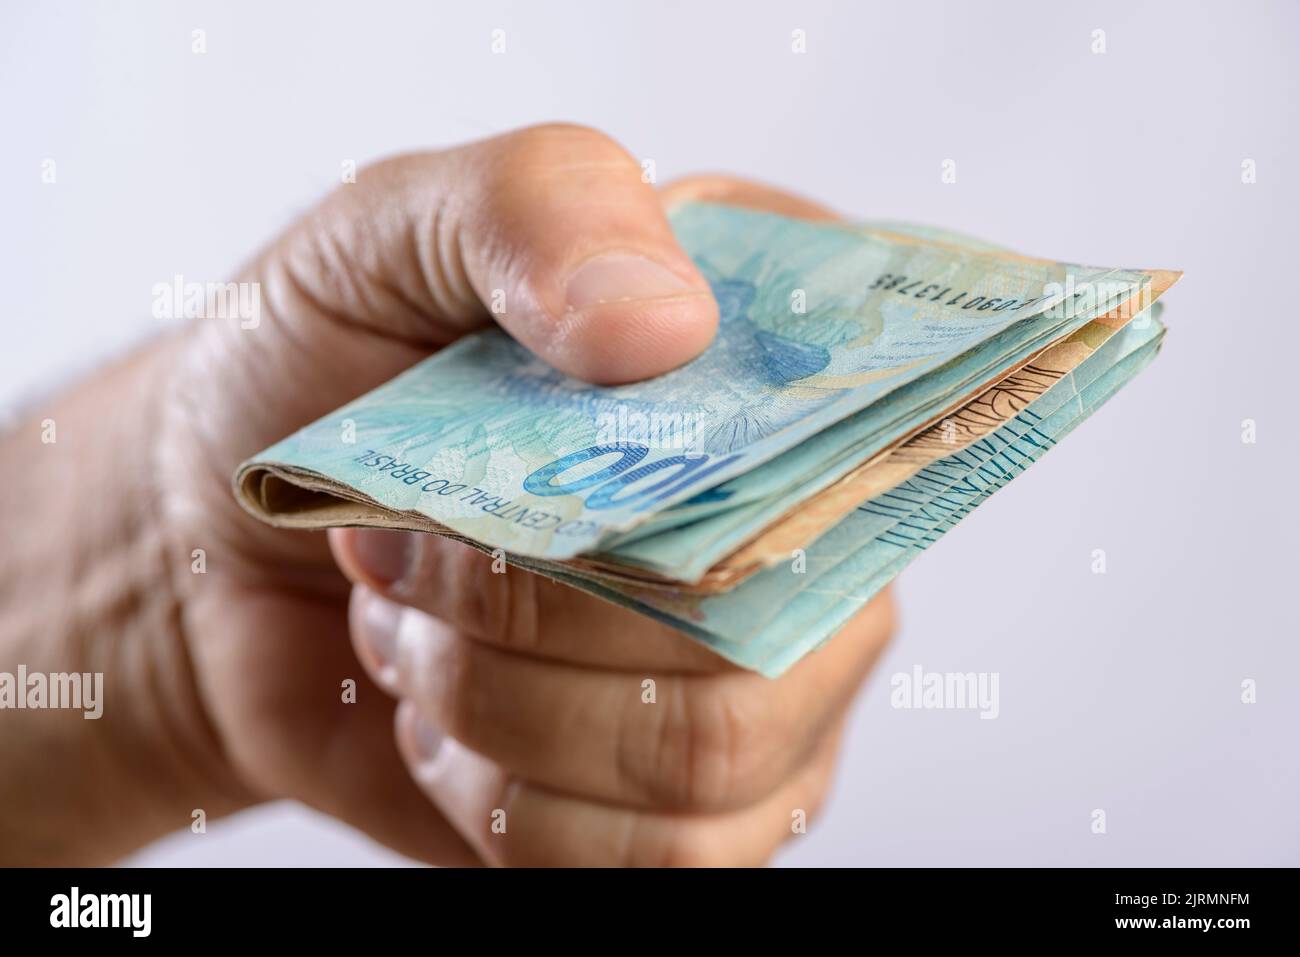 Hand holding money, six hundred reais, Brazilian currency, on white background. Stock Photo